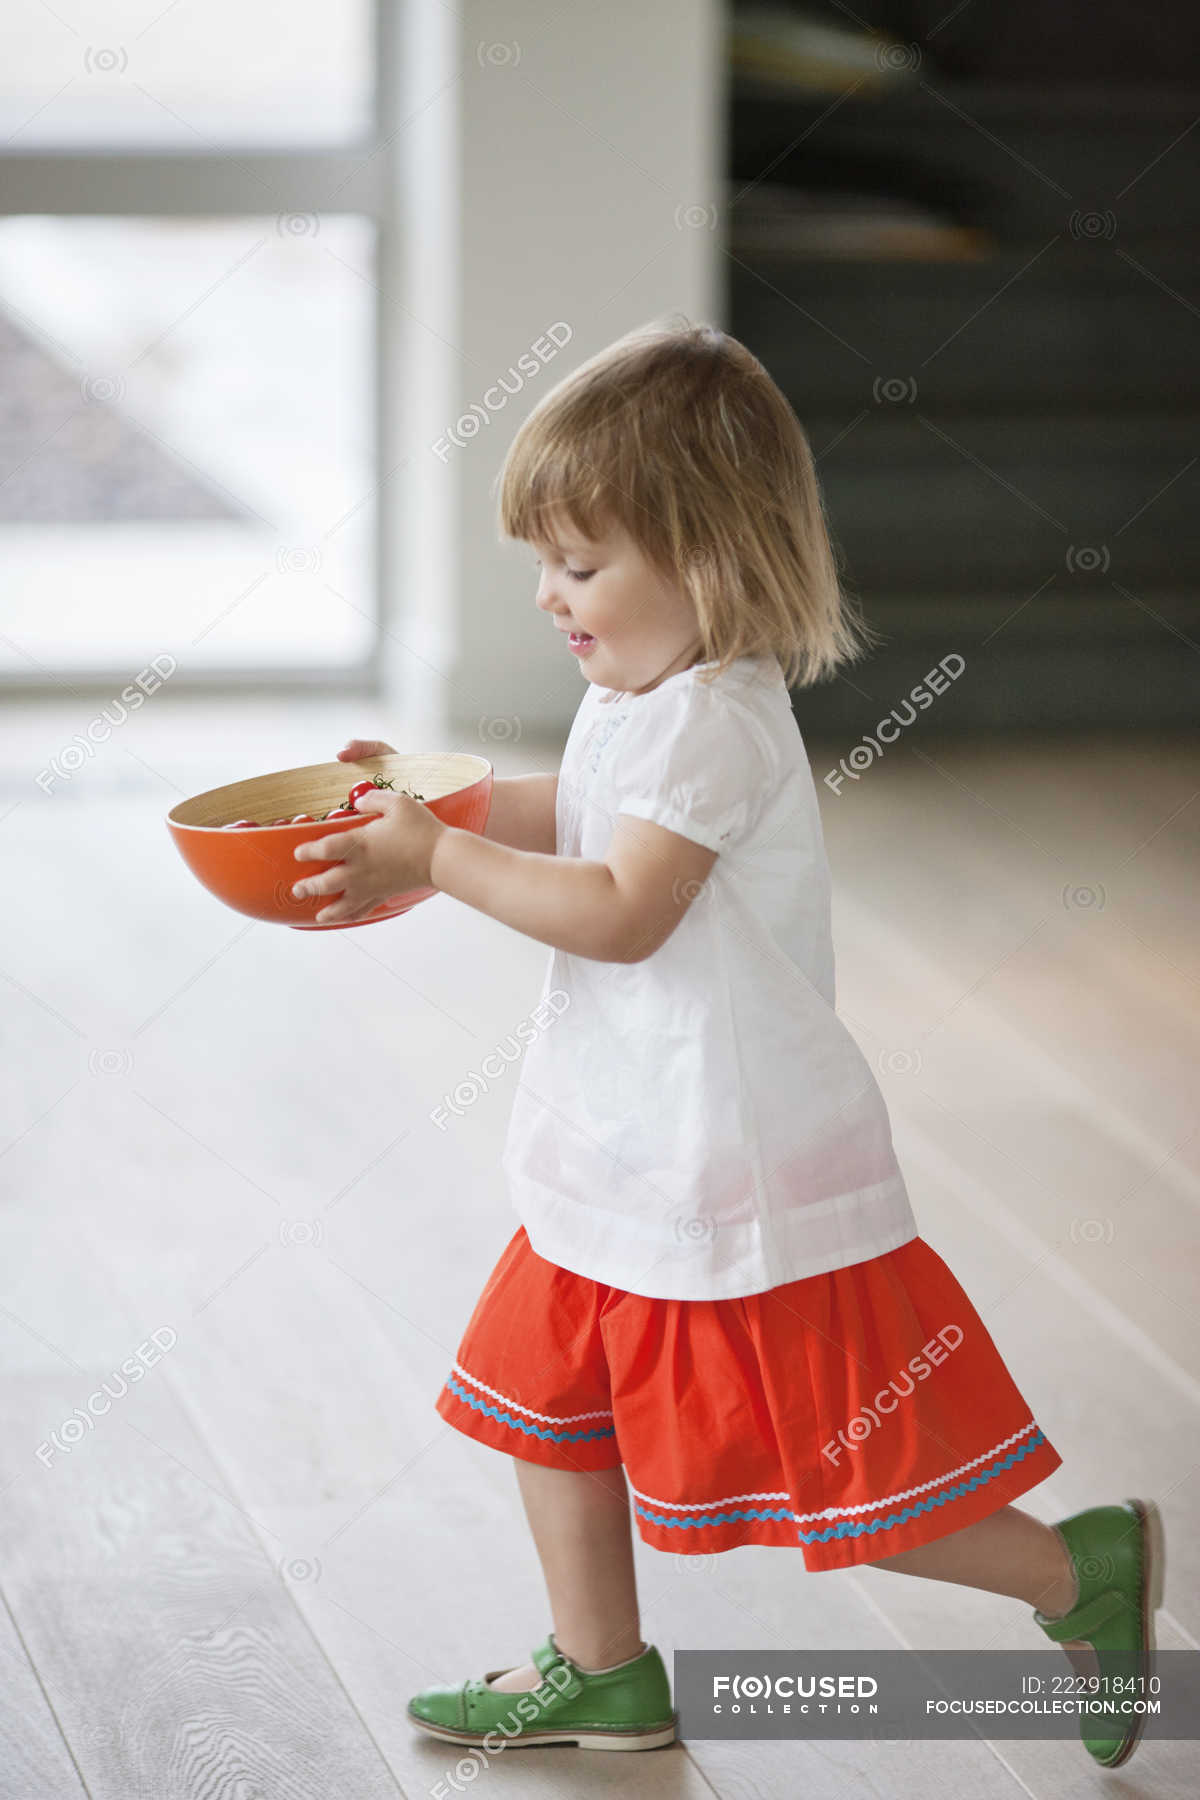 girl in a bowl